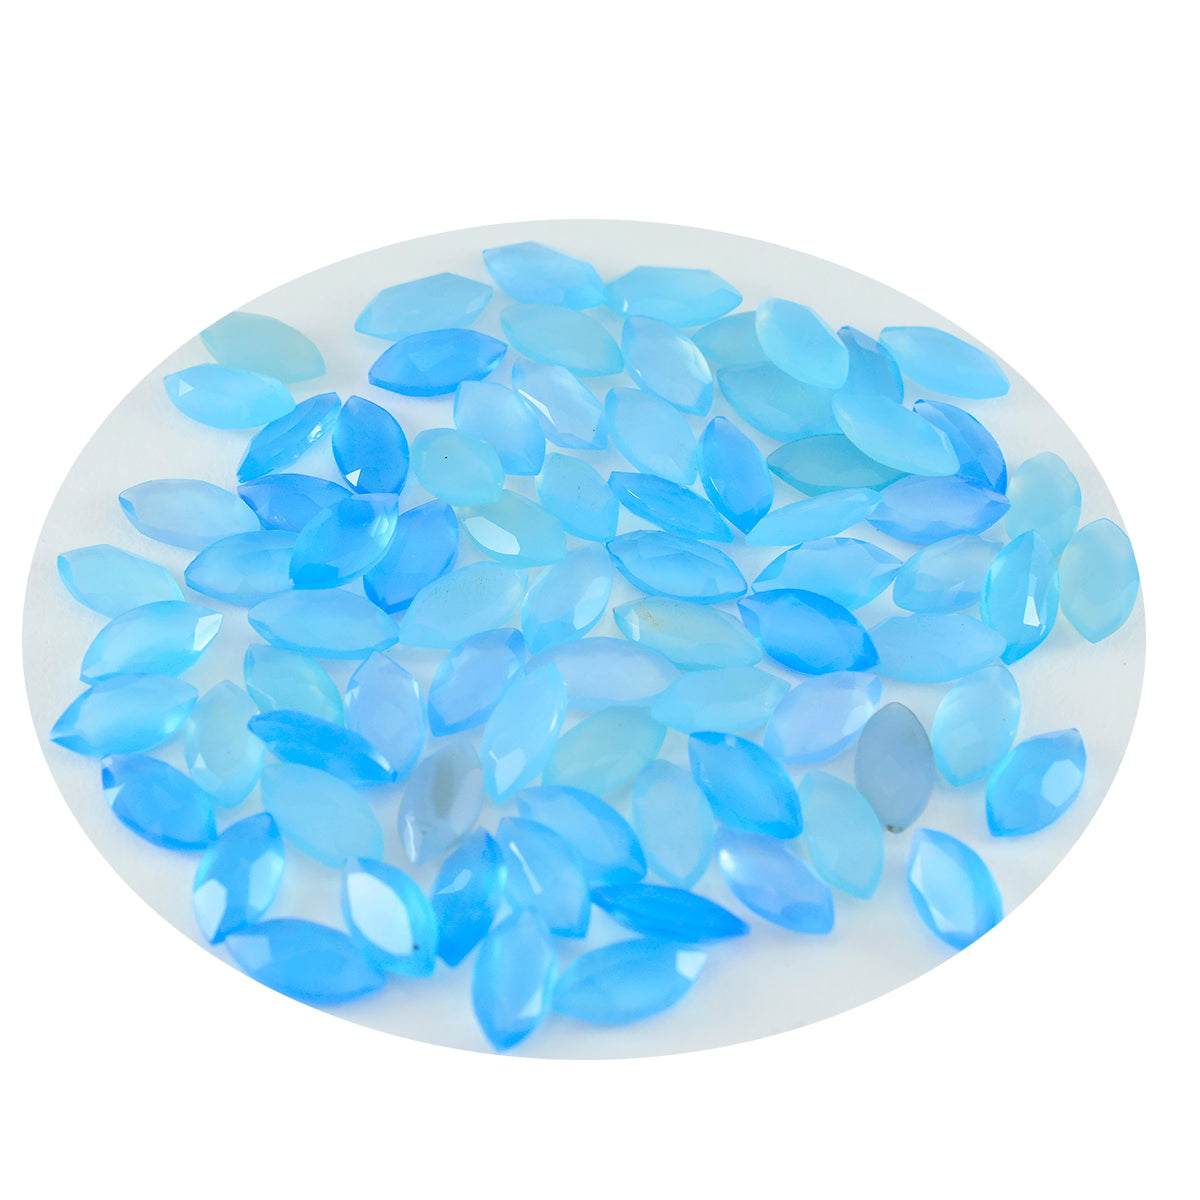 Riyogems 1PC Natural Blue Chalcedony Faceted 4x8 mm Marquise Shape AA Quality Loose Gem